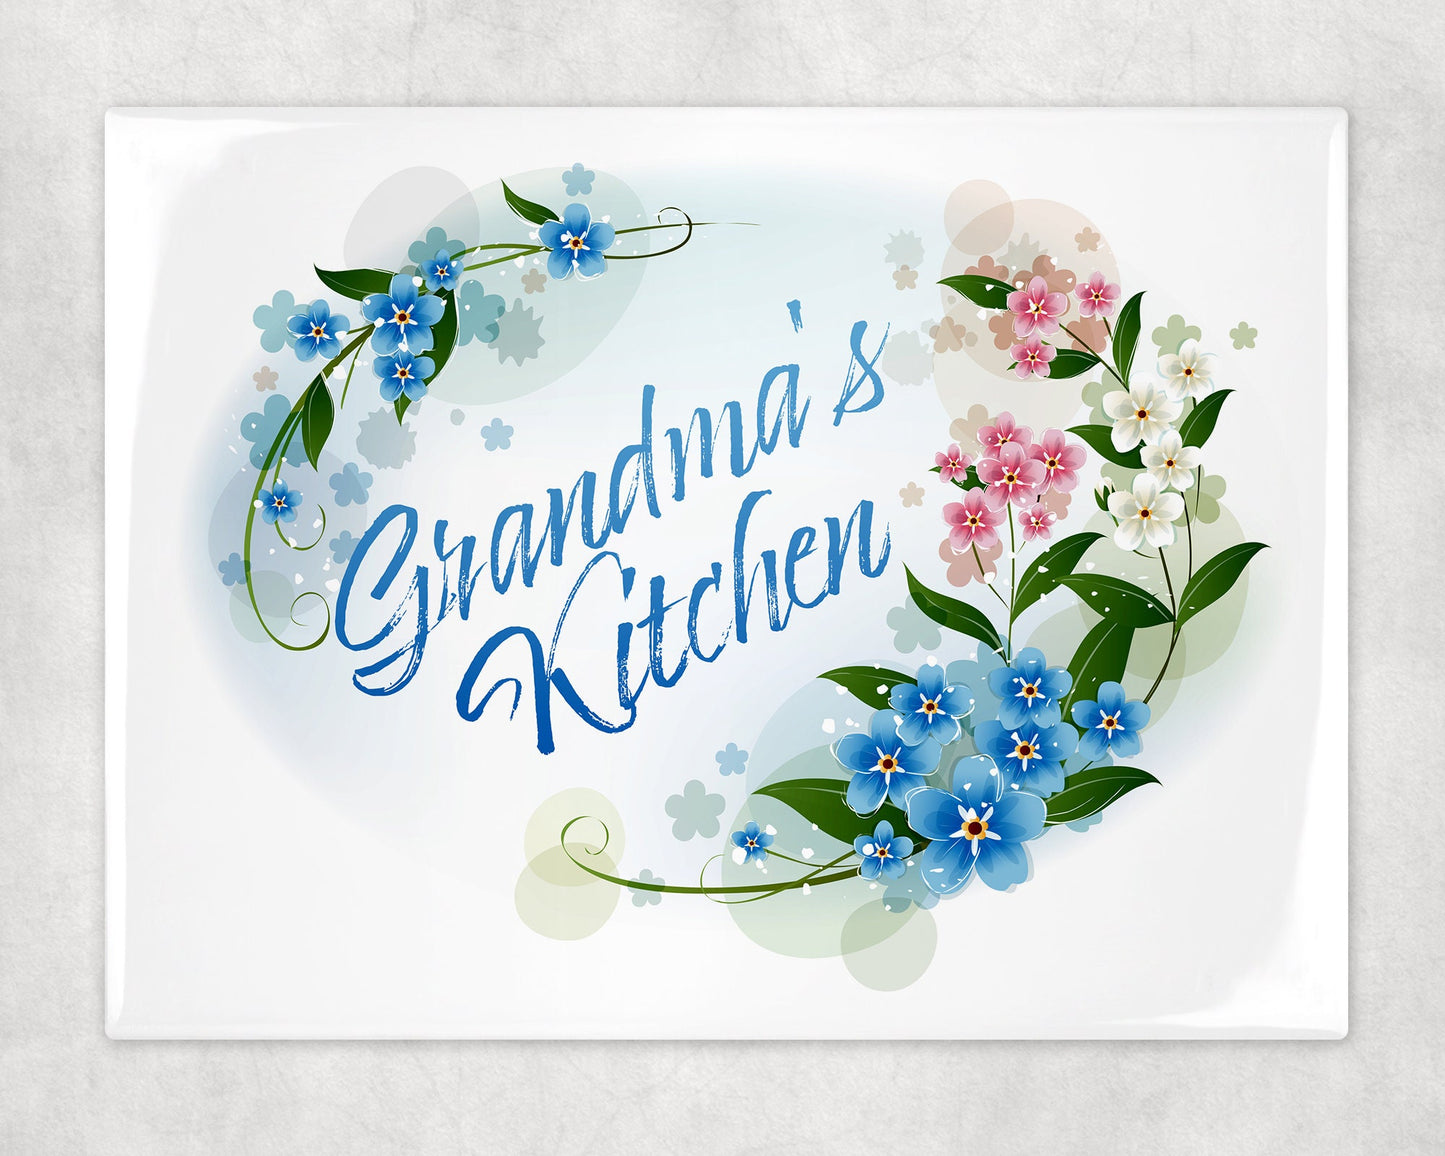 Grandma's Kitchen Flower Wreath Art Decorative Ceramic Tile with Optional Easel Back - 6x8 inches